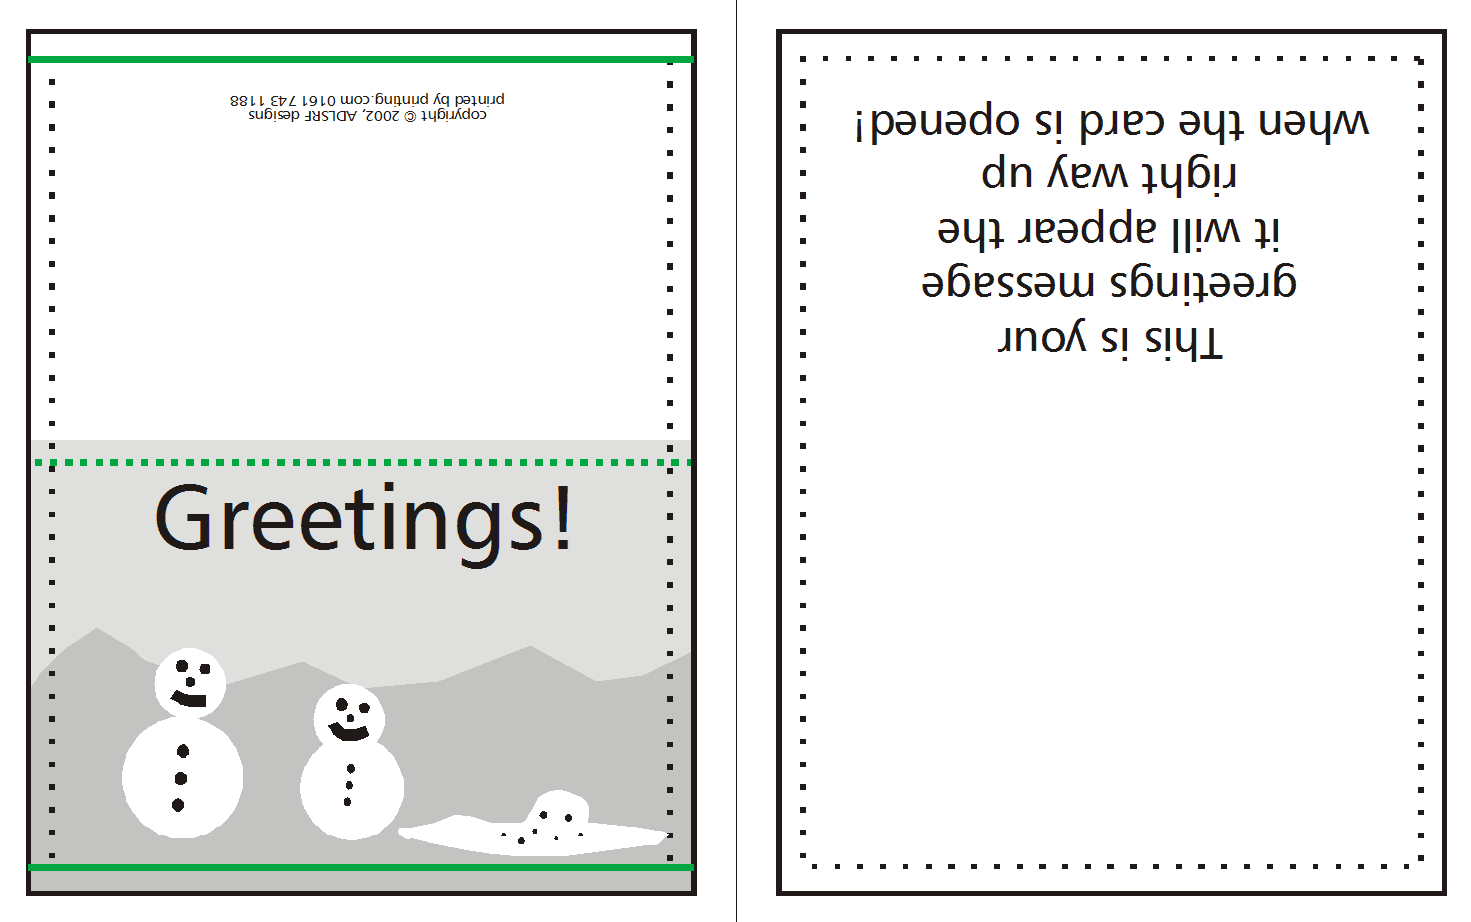 How To Supply Greeting/christmas Cards | Printing Uk Inside Quarter Fold Card Template